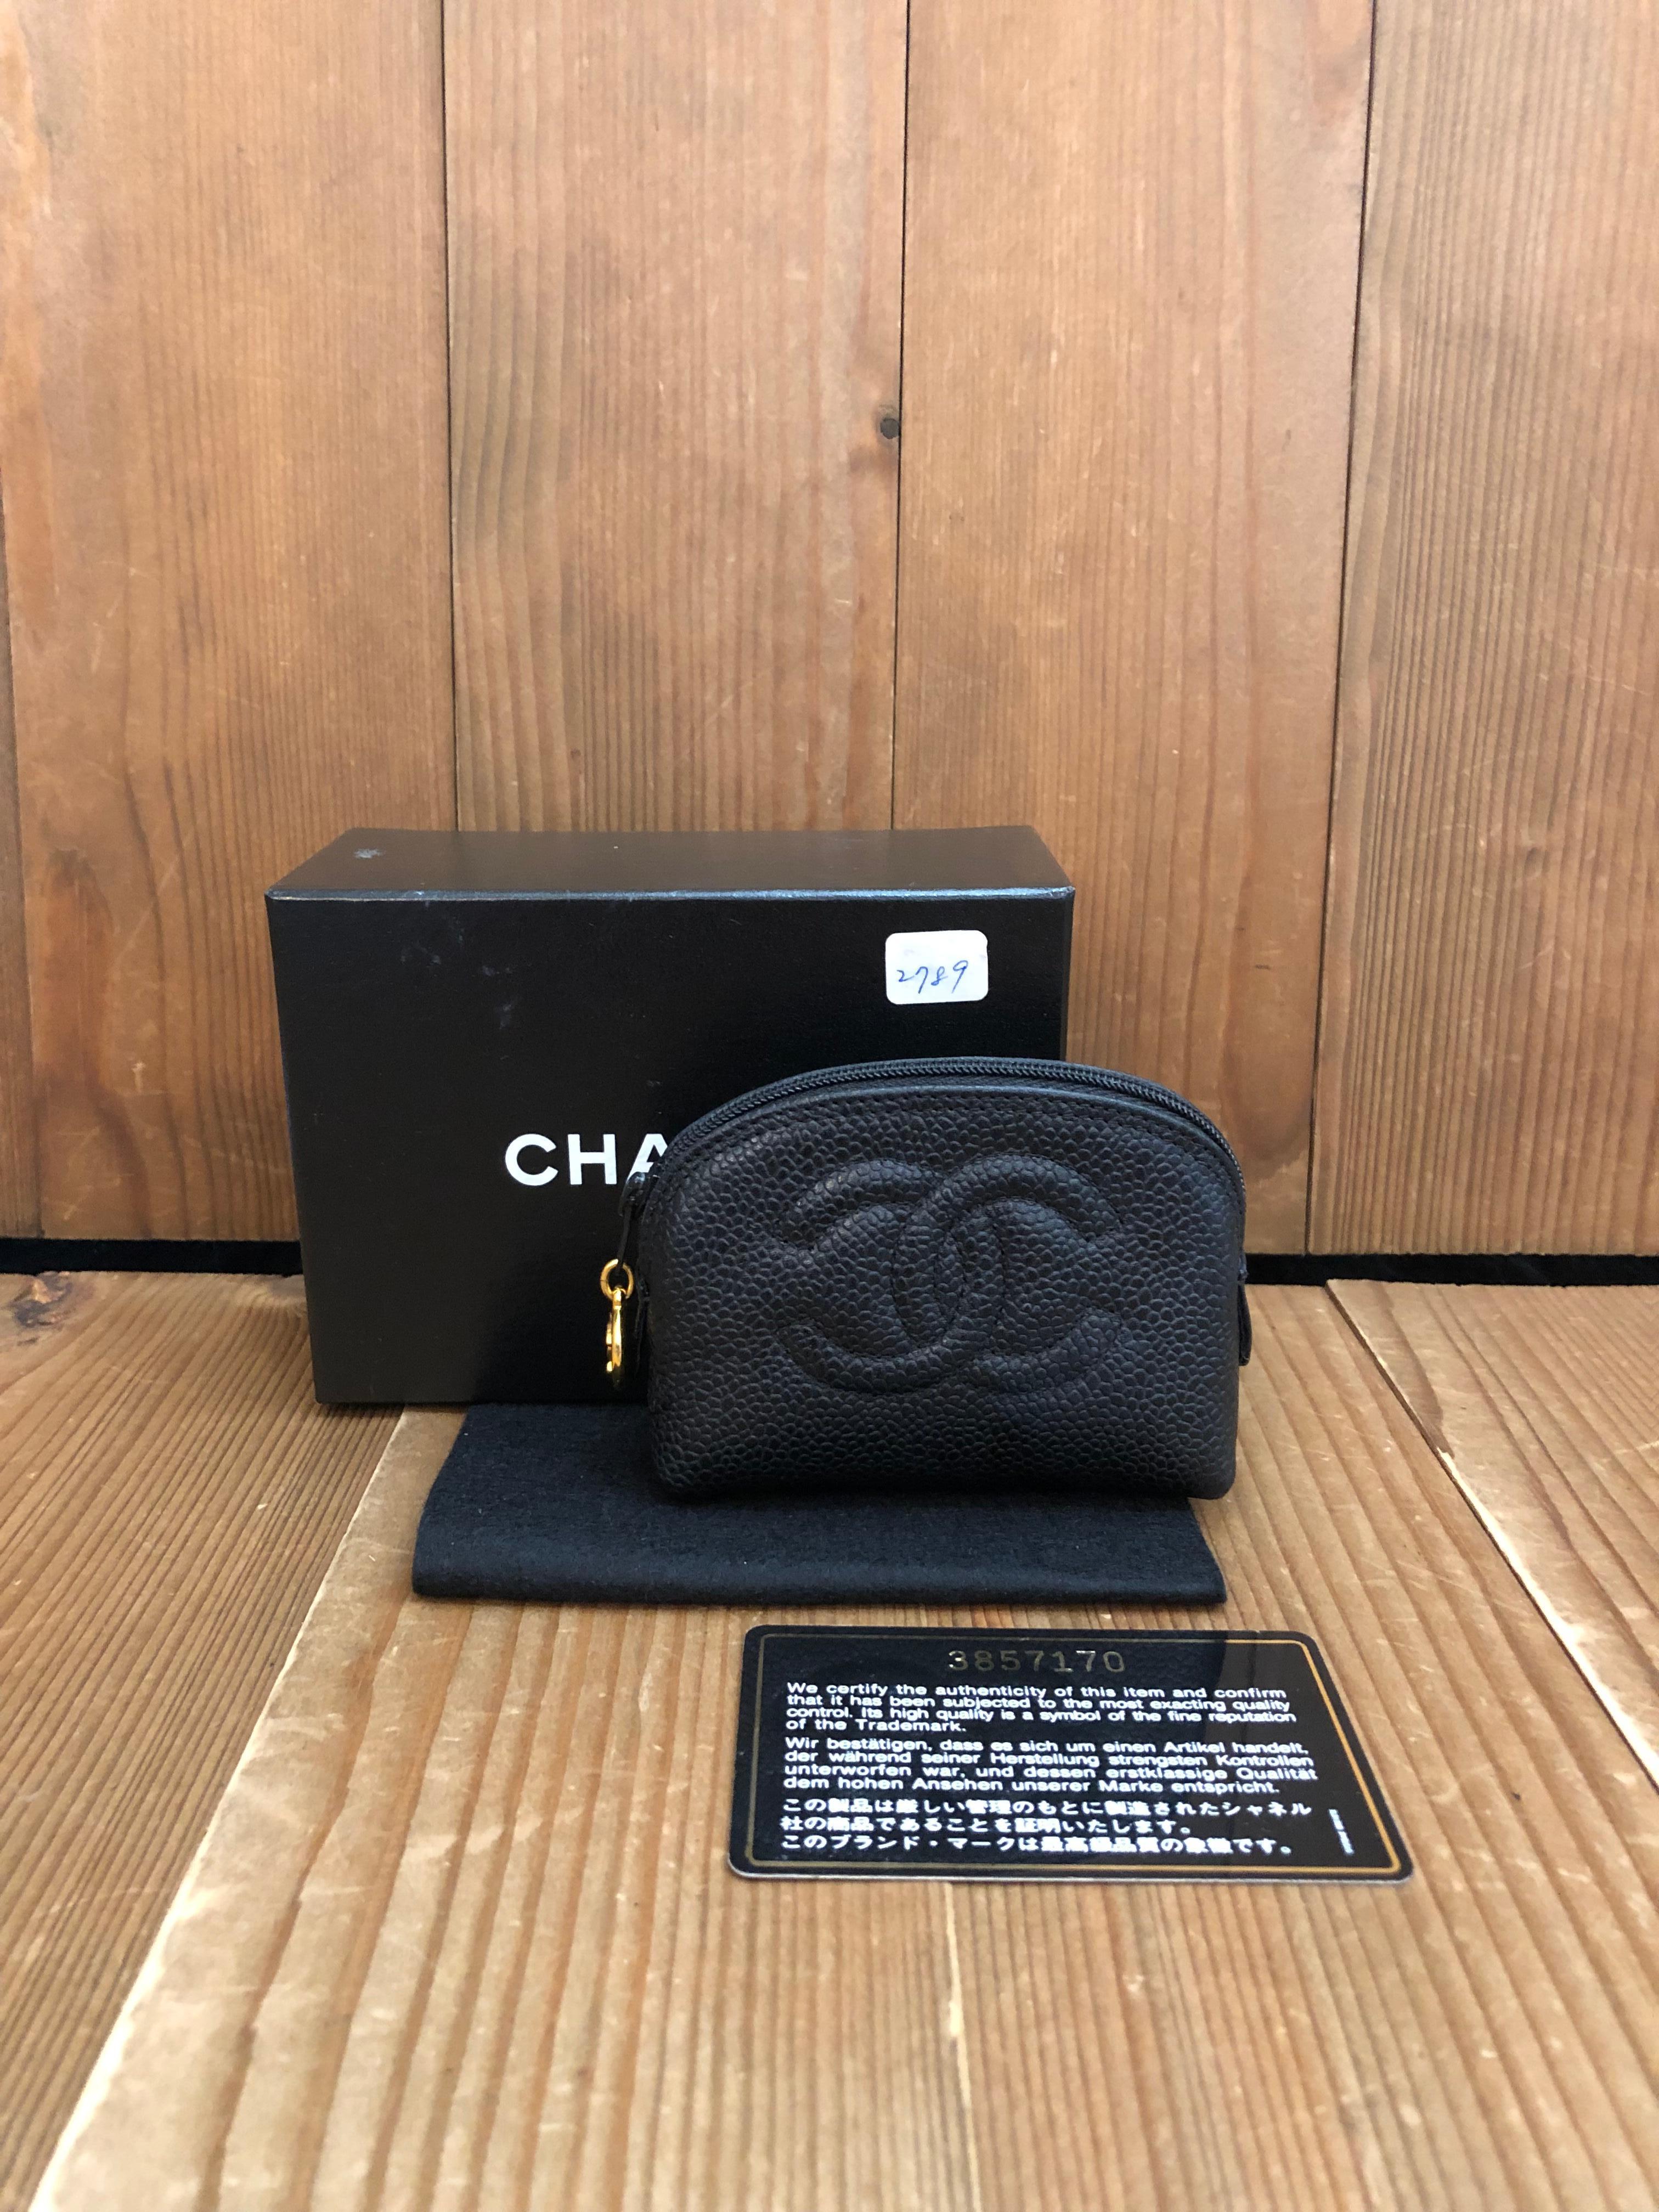 This vintage CHANEL mini pouch bag is crafted of caviar calfskin leather in black featuring gold toned hardware. Top zipper closure opens to a coated interior which has been professionally cleaned. Measures approximately 4 x 3 x 1.5 inches. Made in